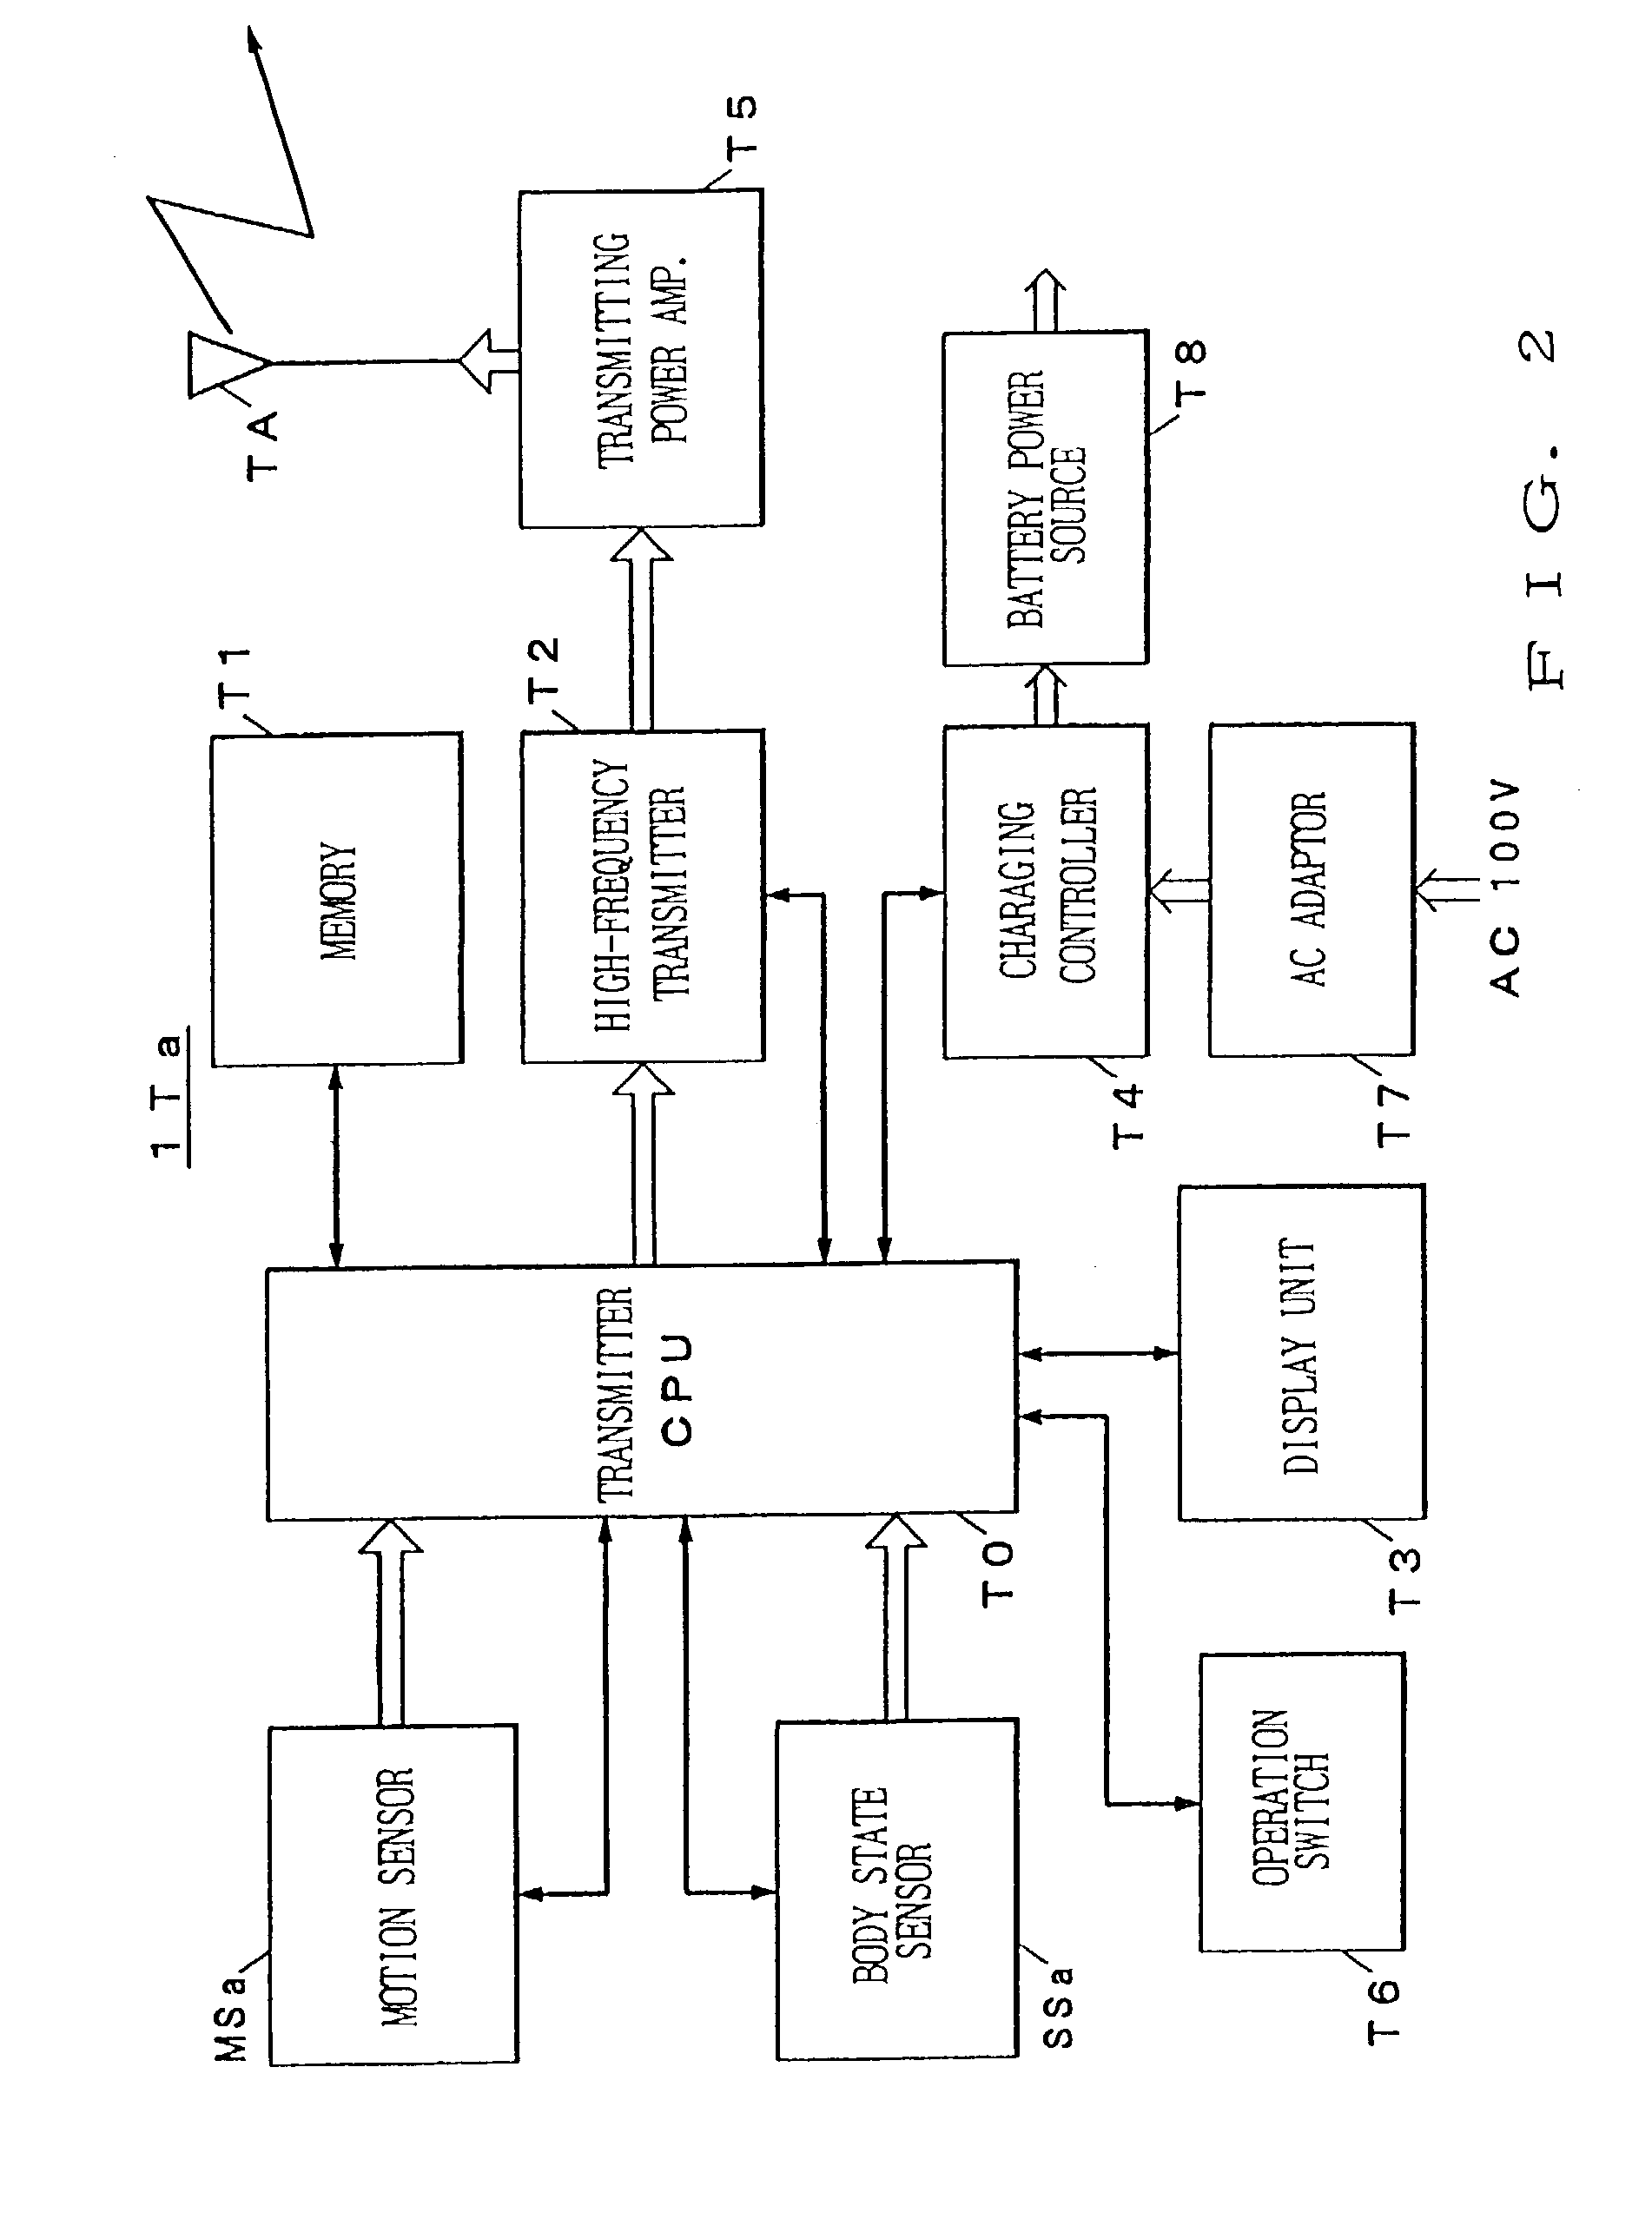 Apparatus and method for detecting performer's motion to interactively control performance of music or the like